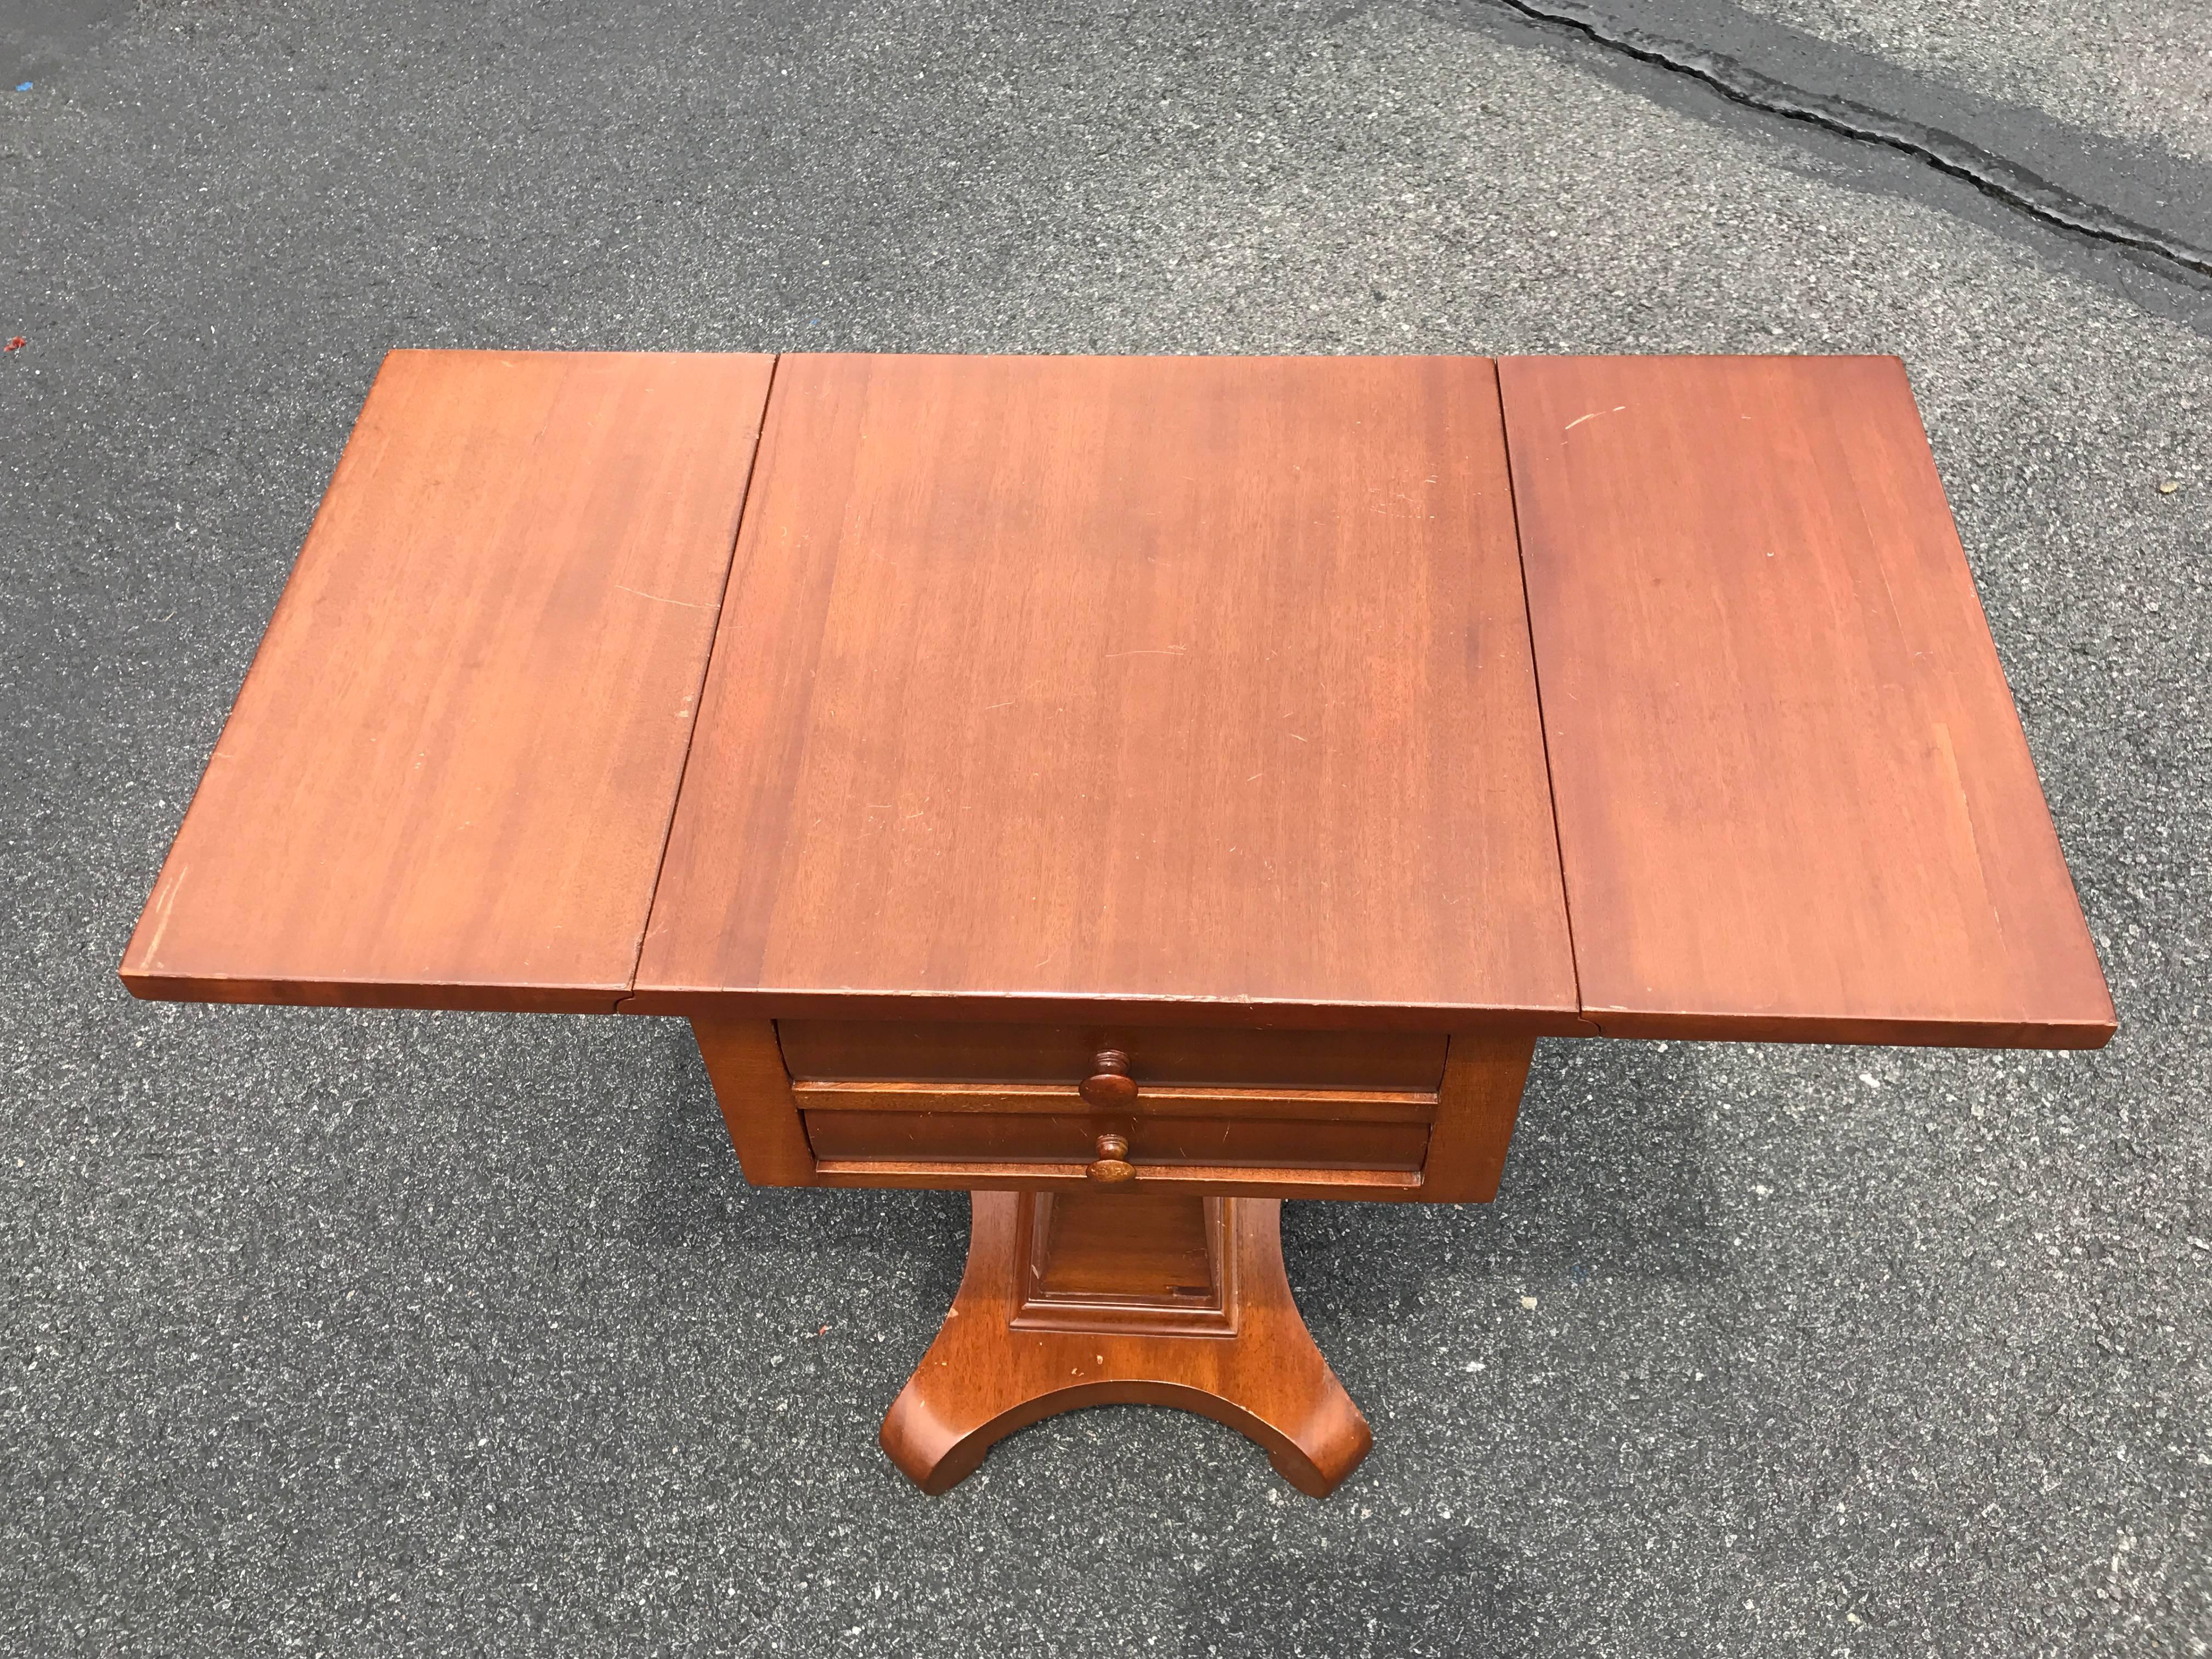 20th Century 1930s English Flip-Top Side Table with Drawers